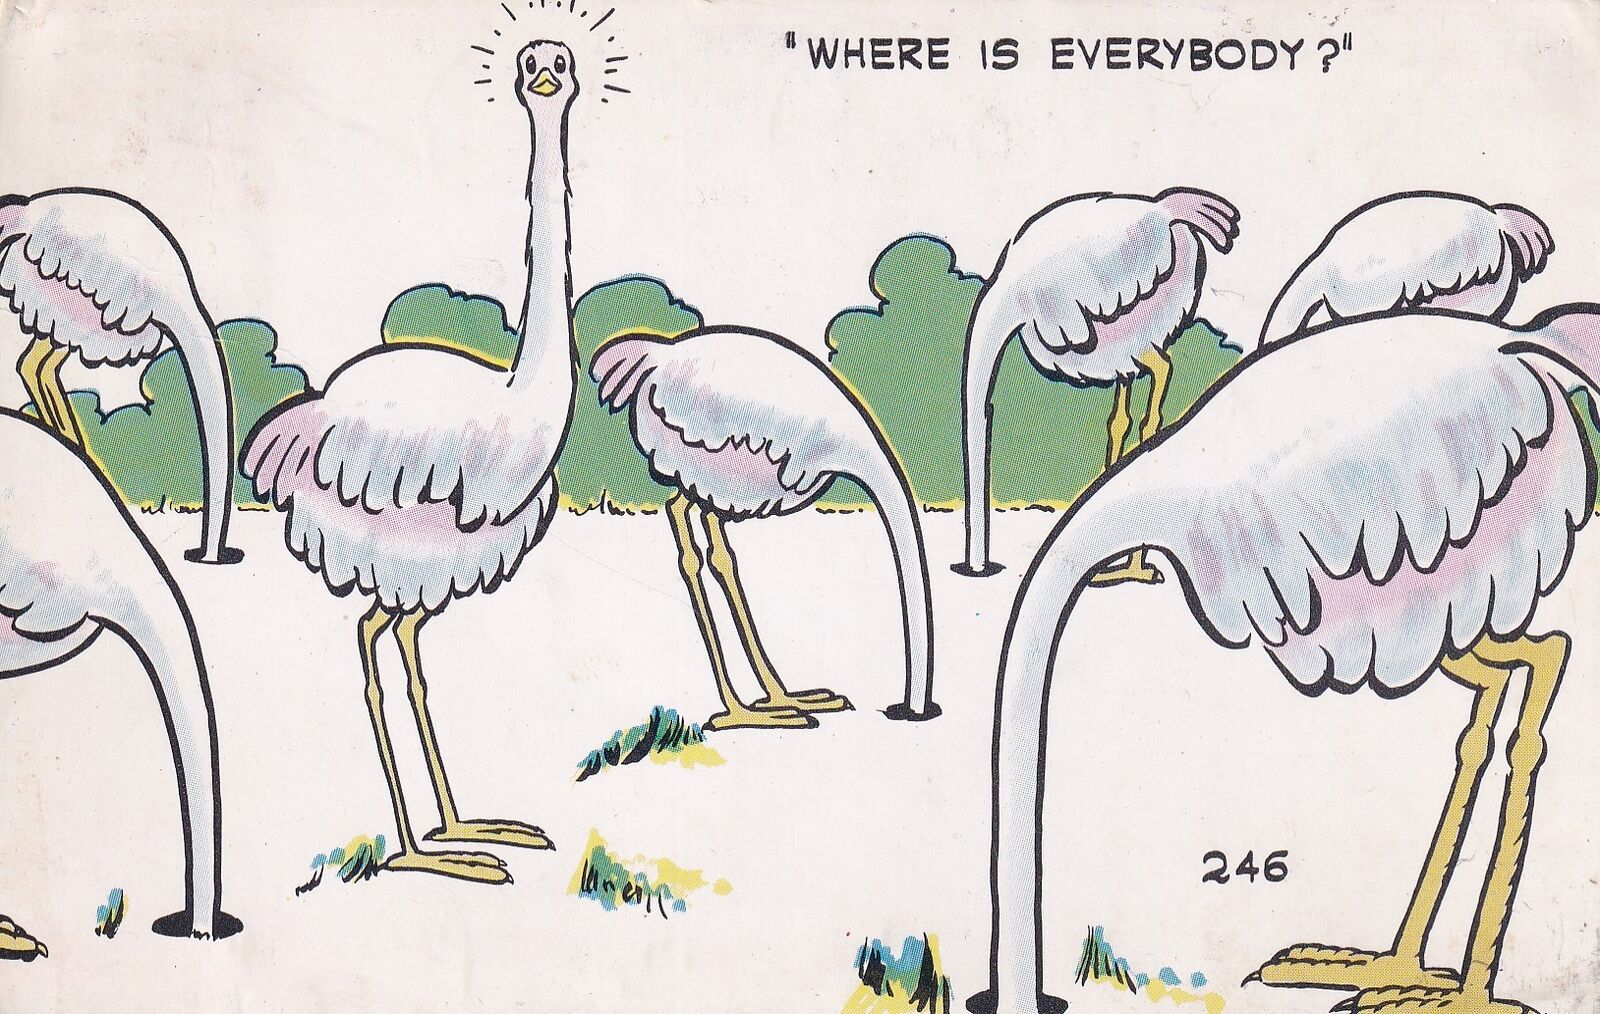 Where Is Everybody Ostrich Comicard by Clem Postcard 1957 Long Beach CA D04